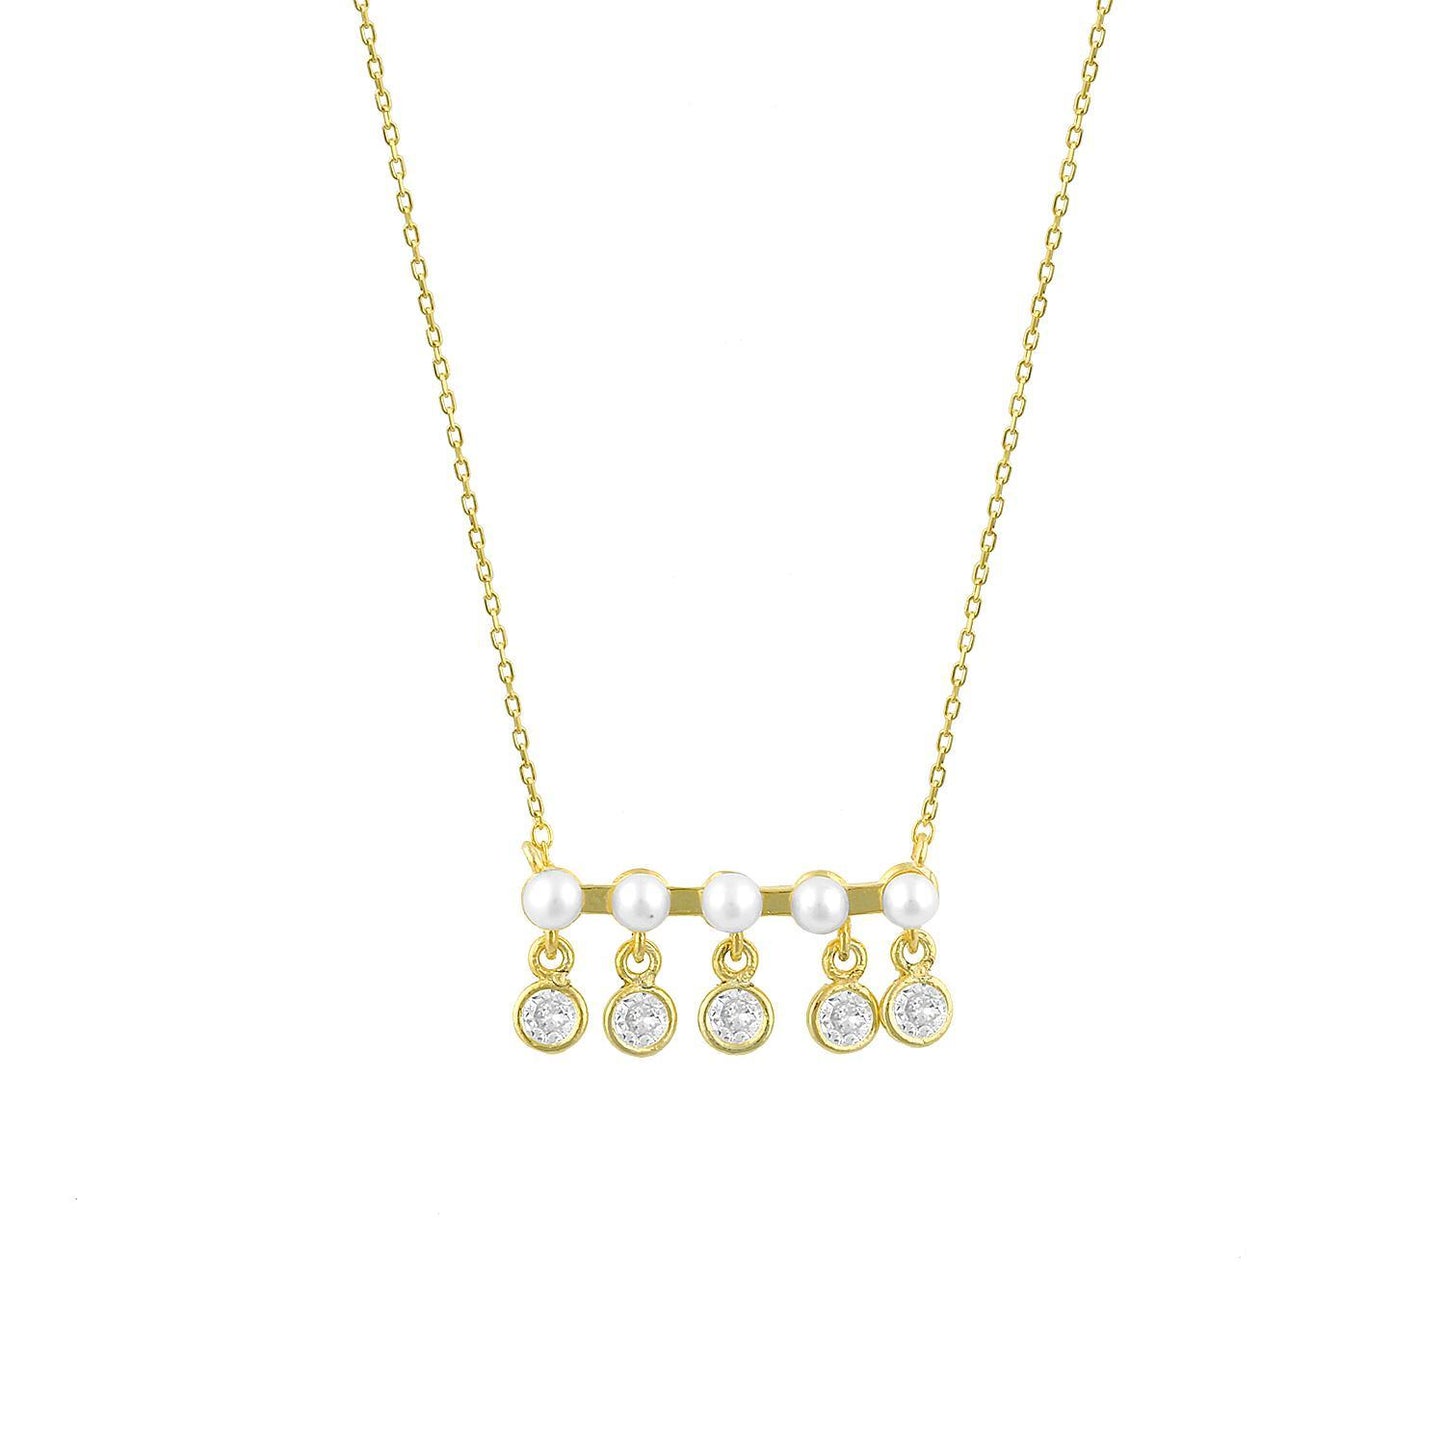 Five Pearls and Crystals on a Gold Bar Necklace JEWELRY The Sis Kiss